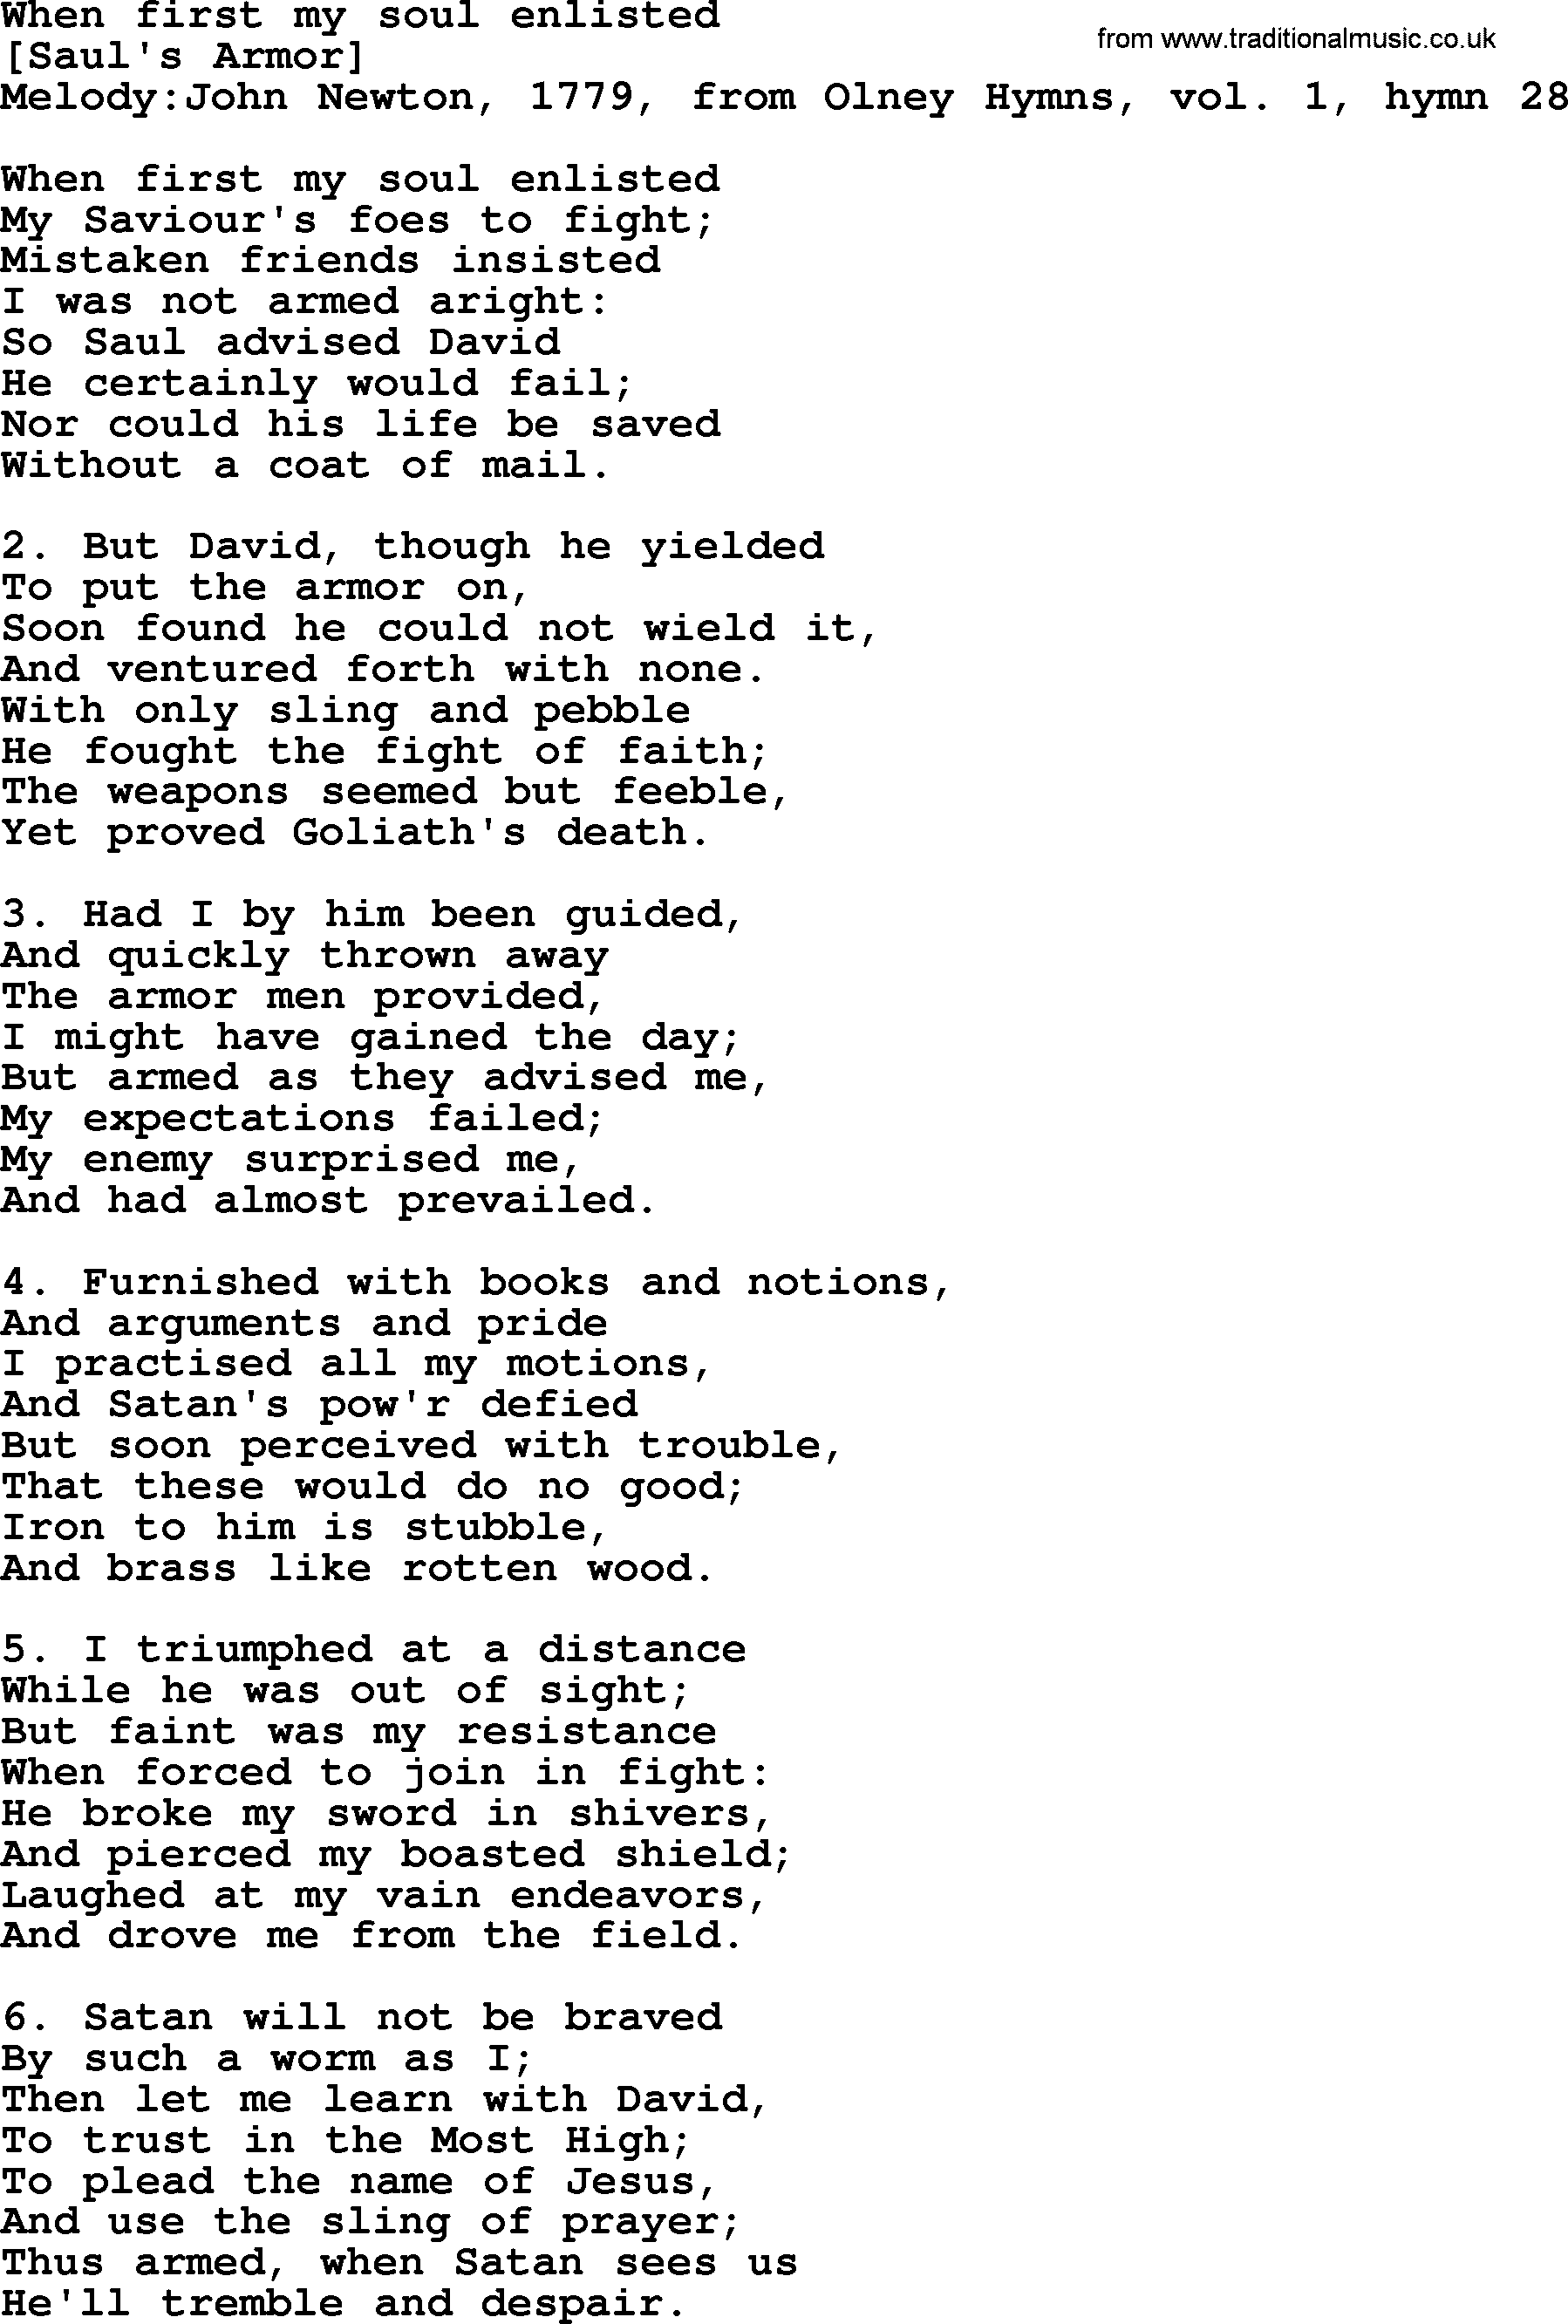 Old English Song: When First My Soul Enlisted lyrics